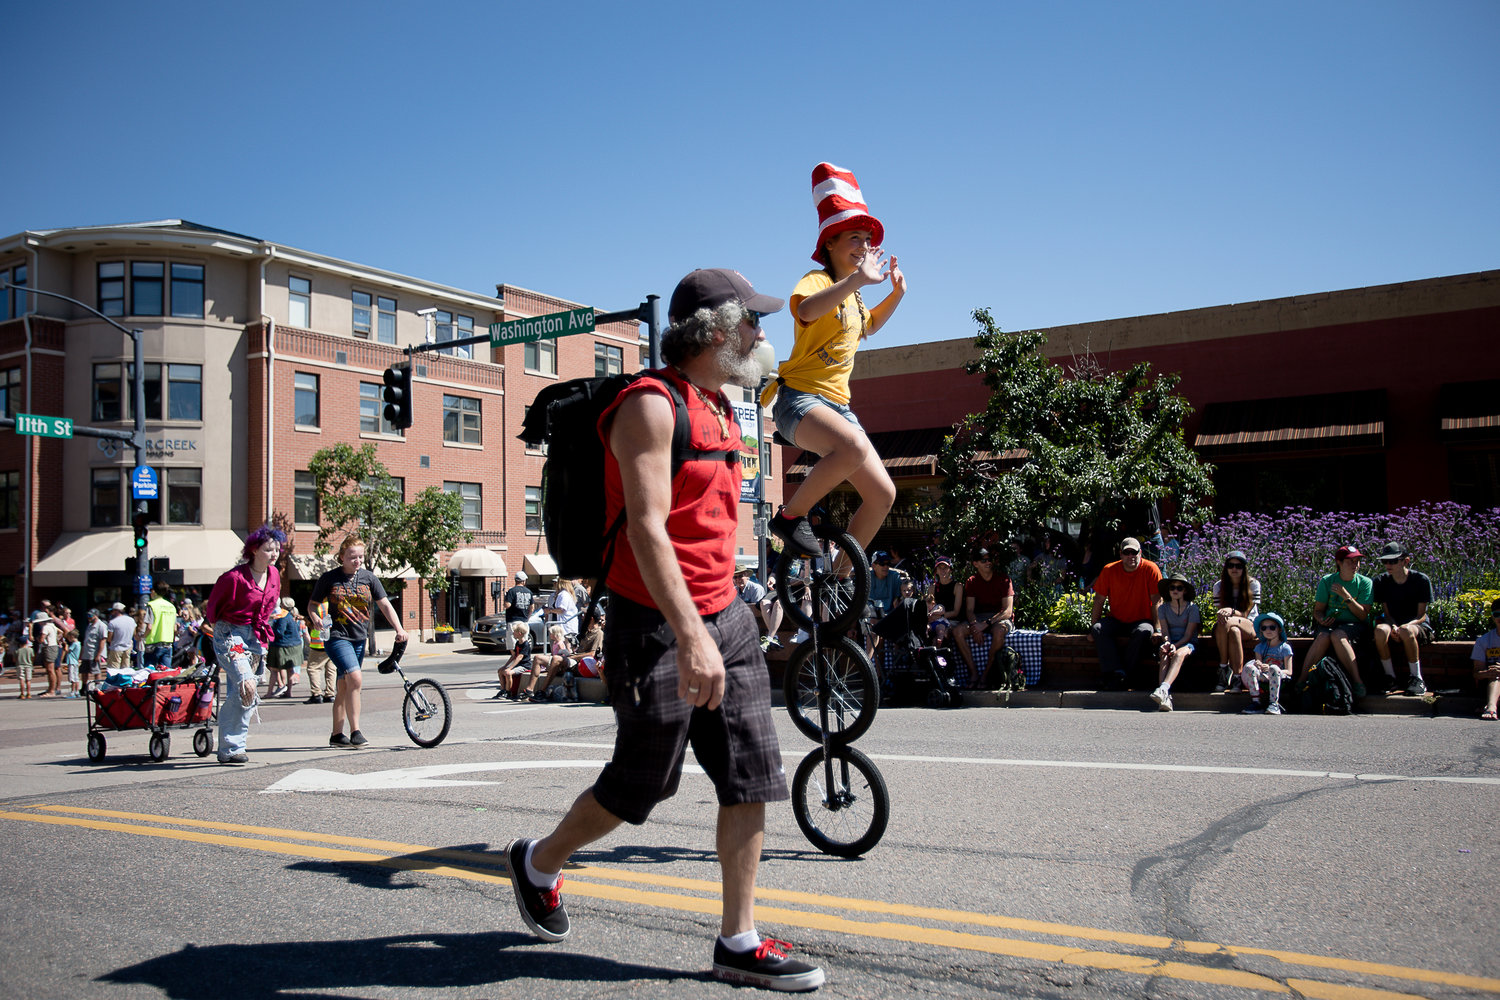 Members of the Welchester Circus Arts Club ride through on different unicycles during &quot;The Best of the West&quot; Parade on July 30 in downtown Golden.